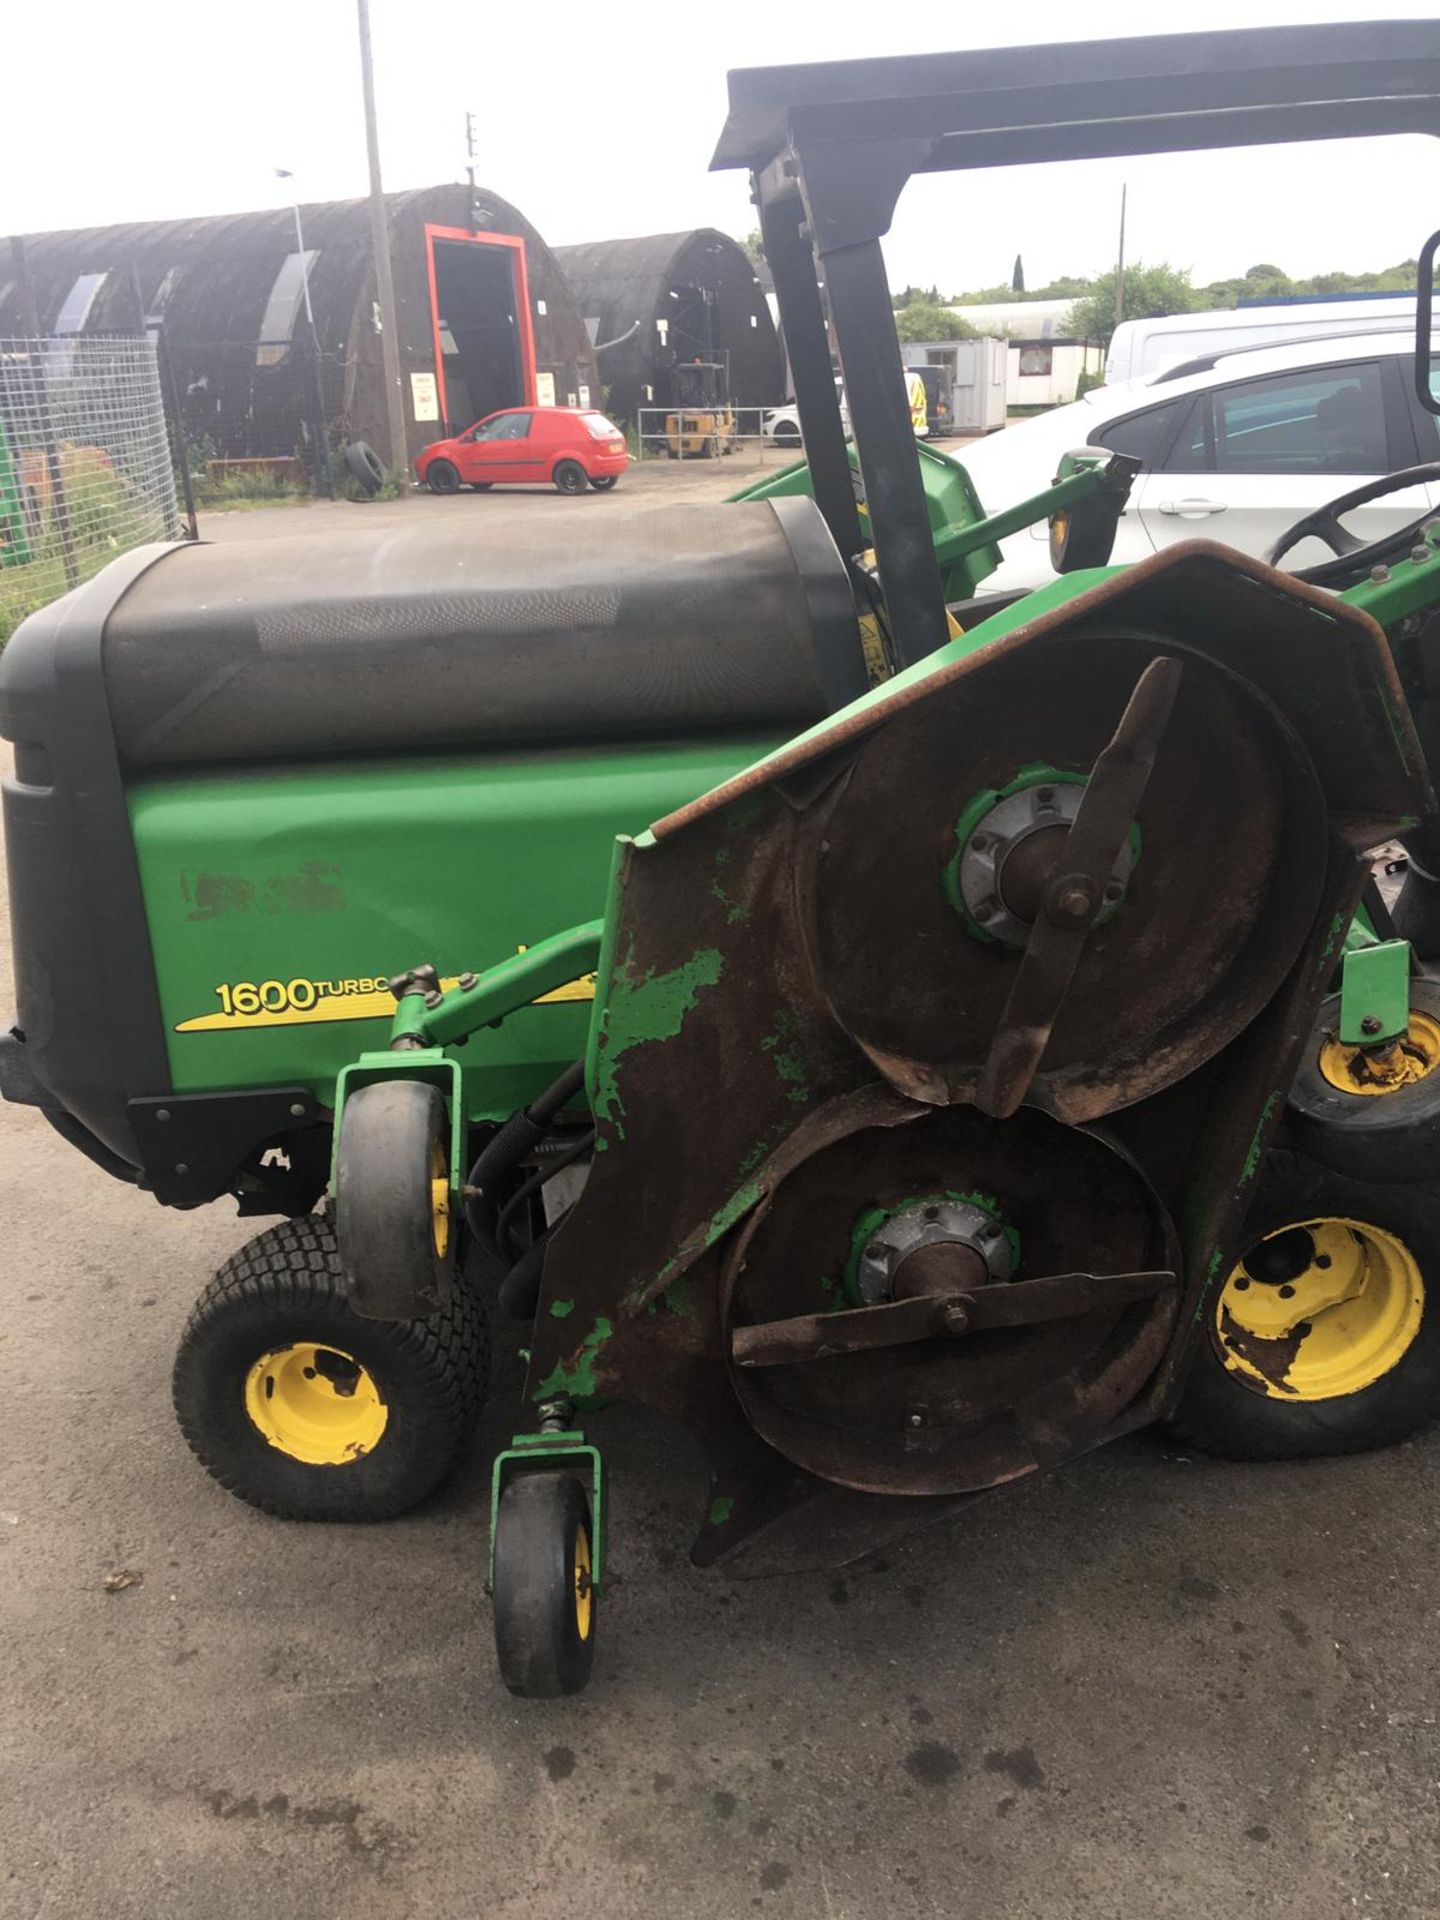 JOHN DEERE 1600 WIDE AREA TURBO BATWING RIDE ON LAWN MOWER, CRUISE CONTROL, RUNS & WORKS *NO VAT* - Image 12 of 24